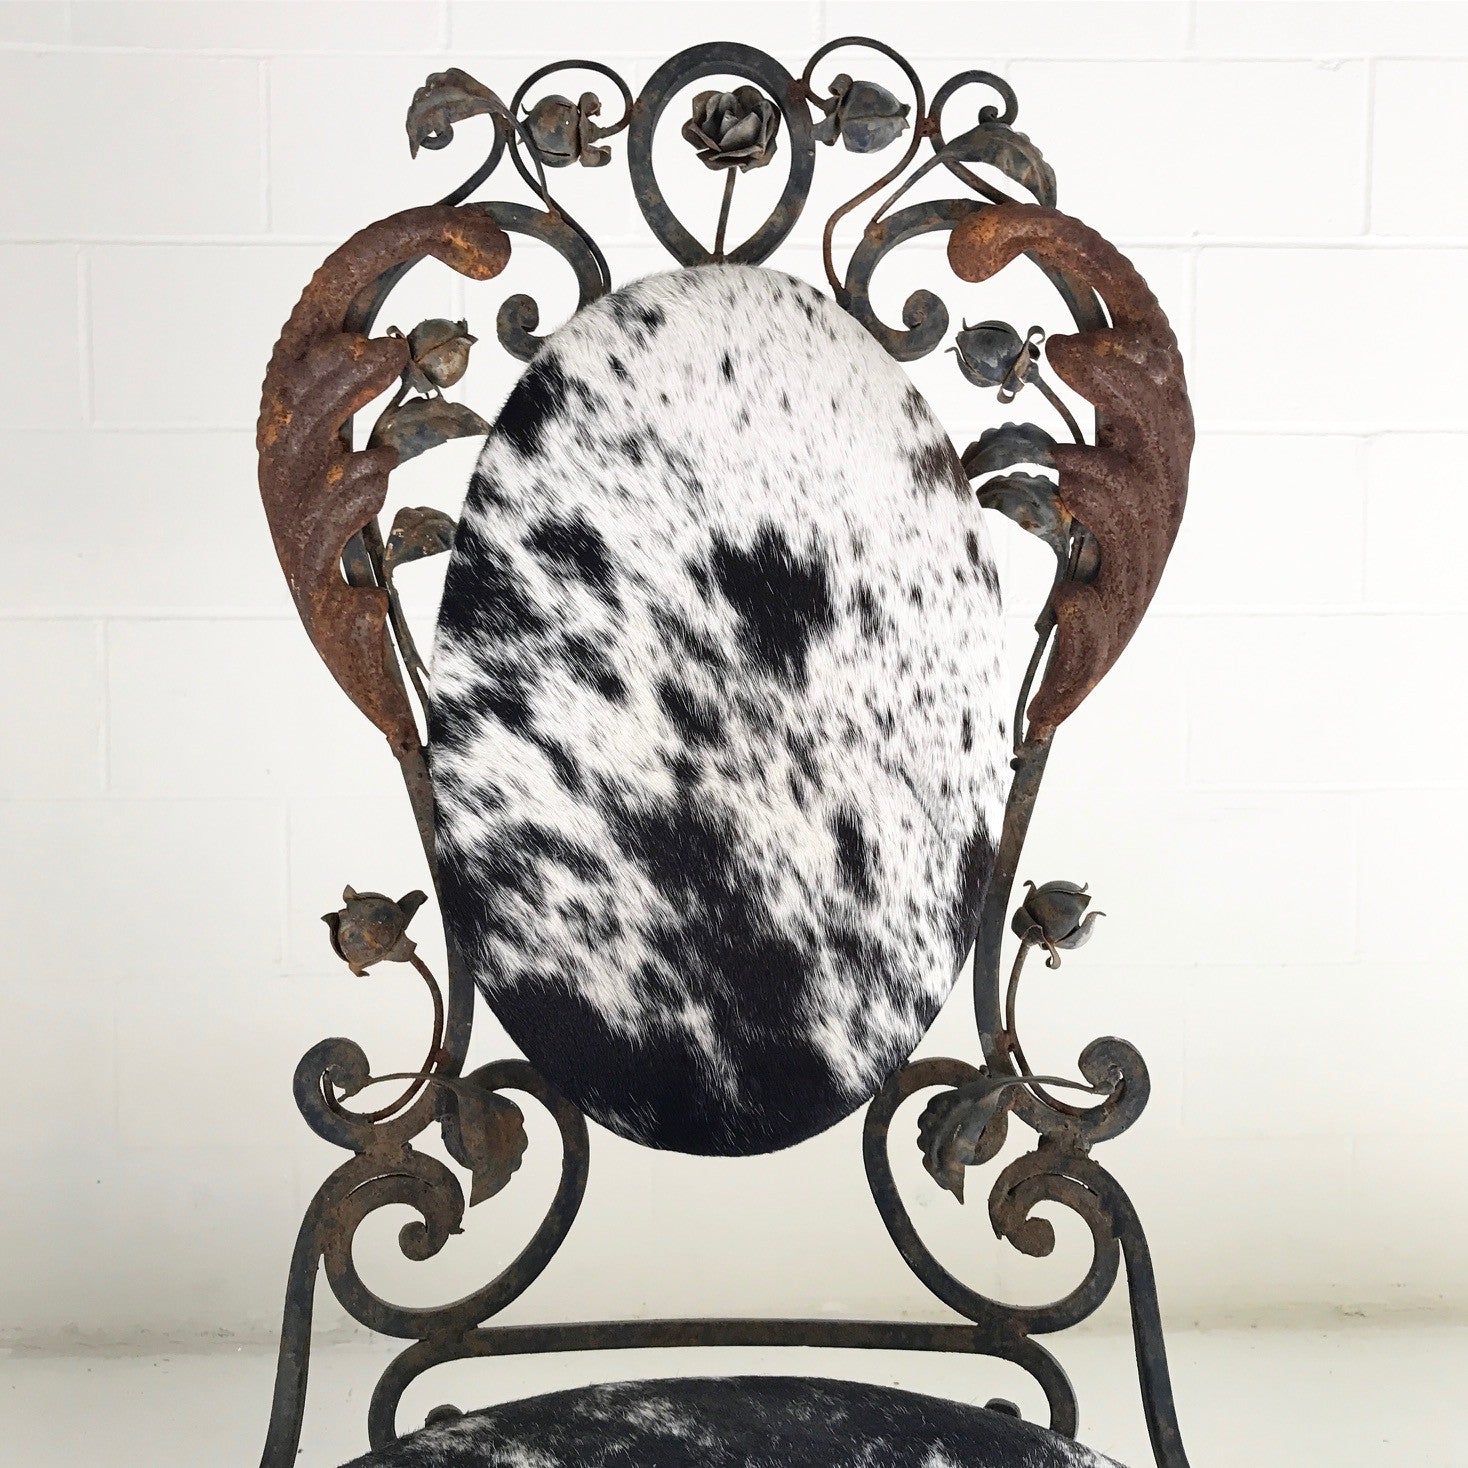 Vintage Iron Garden Chairs in Speckled Brazilian Cowhide - A Pair - FORSYTH